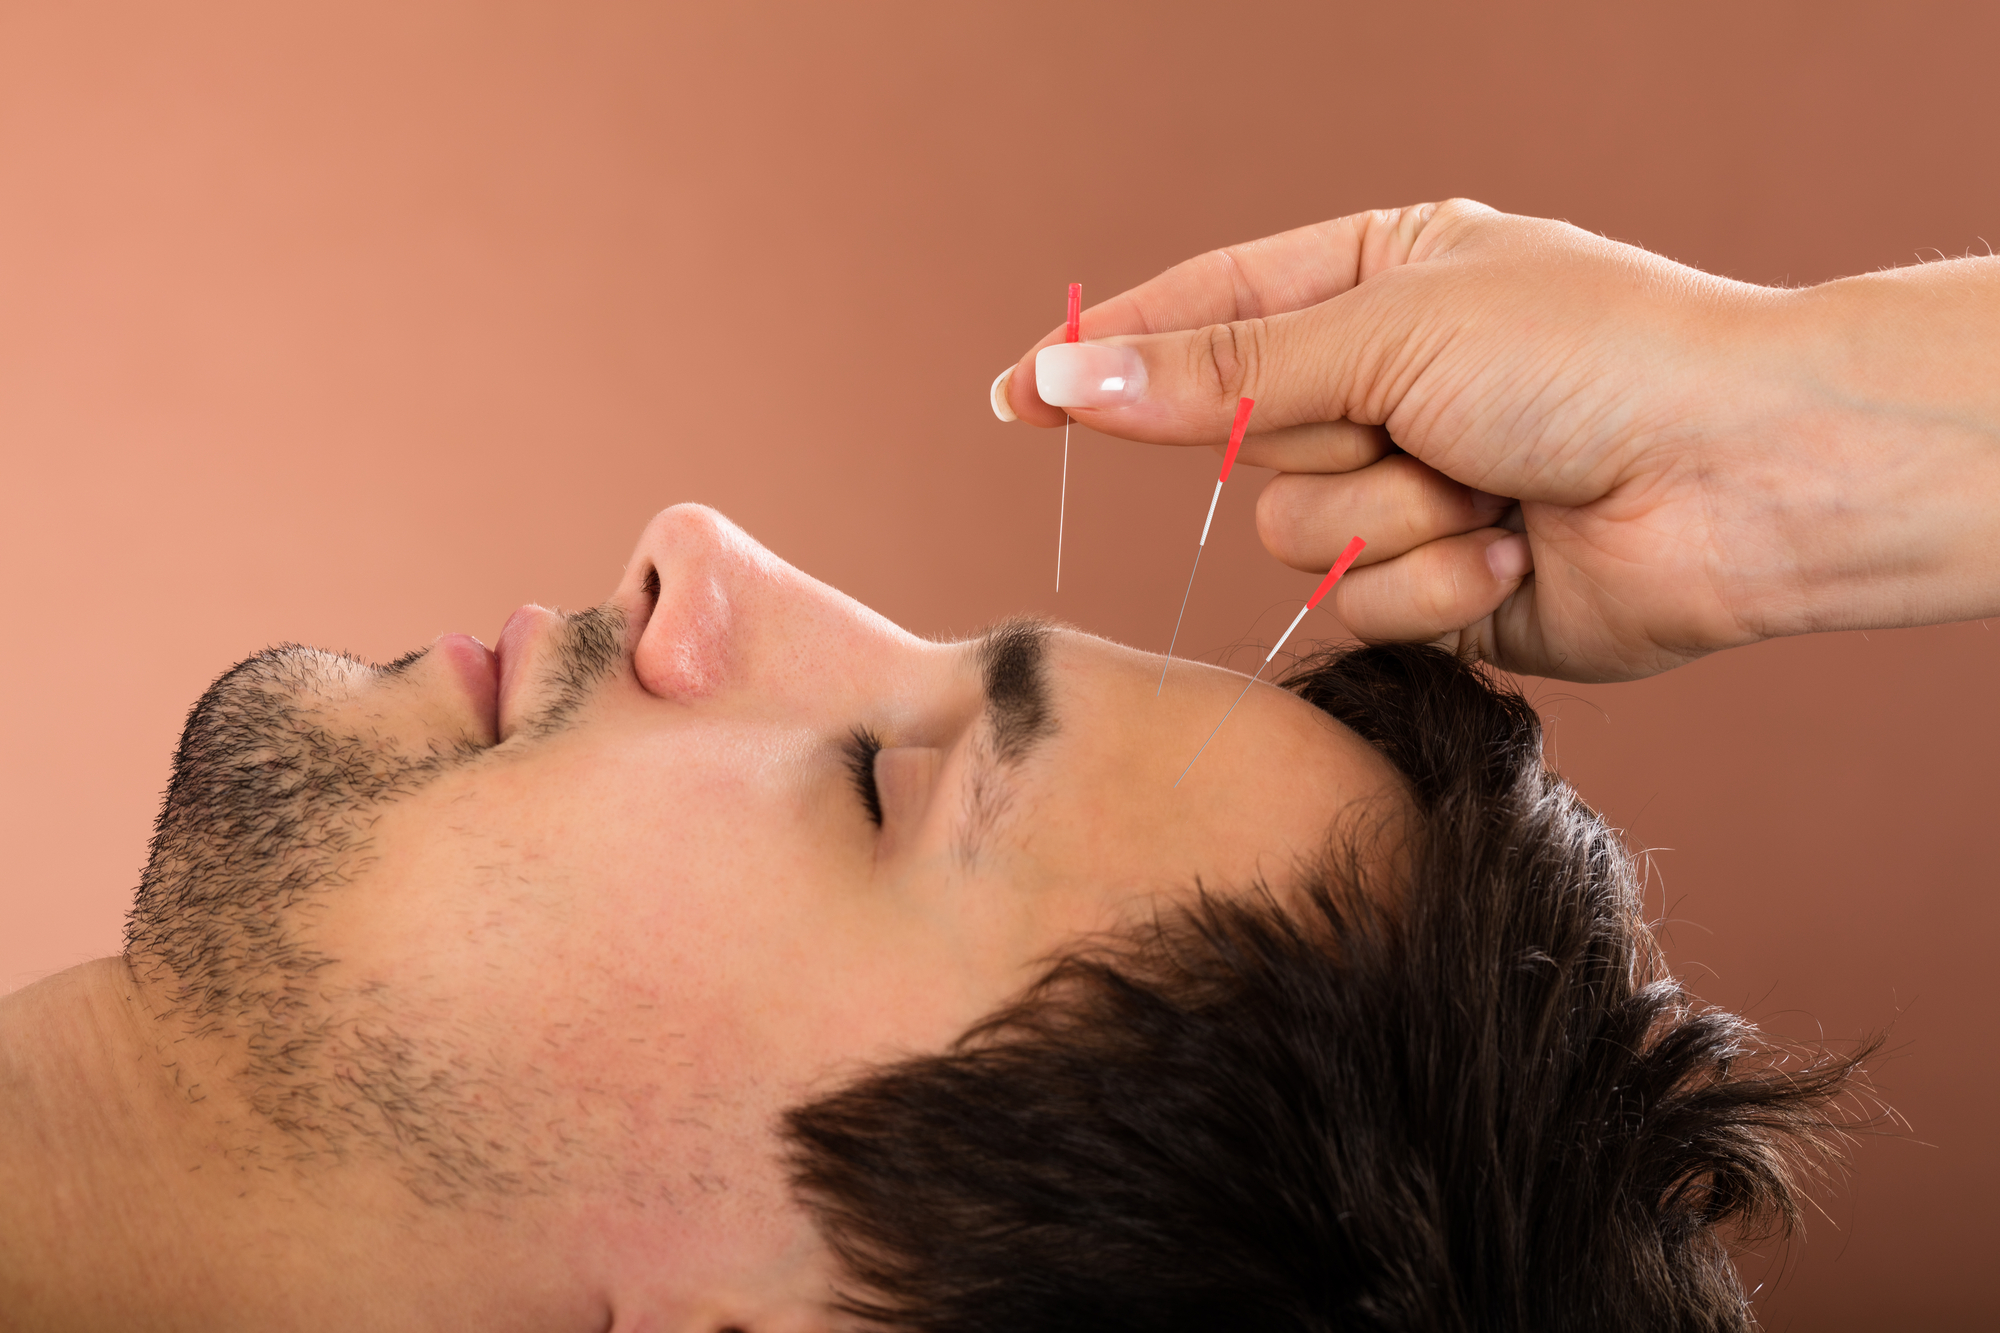 man getting accupuncture treatment in forehead